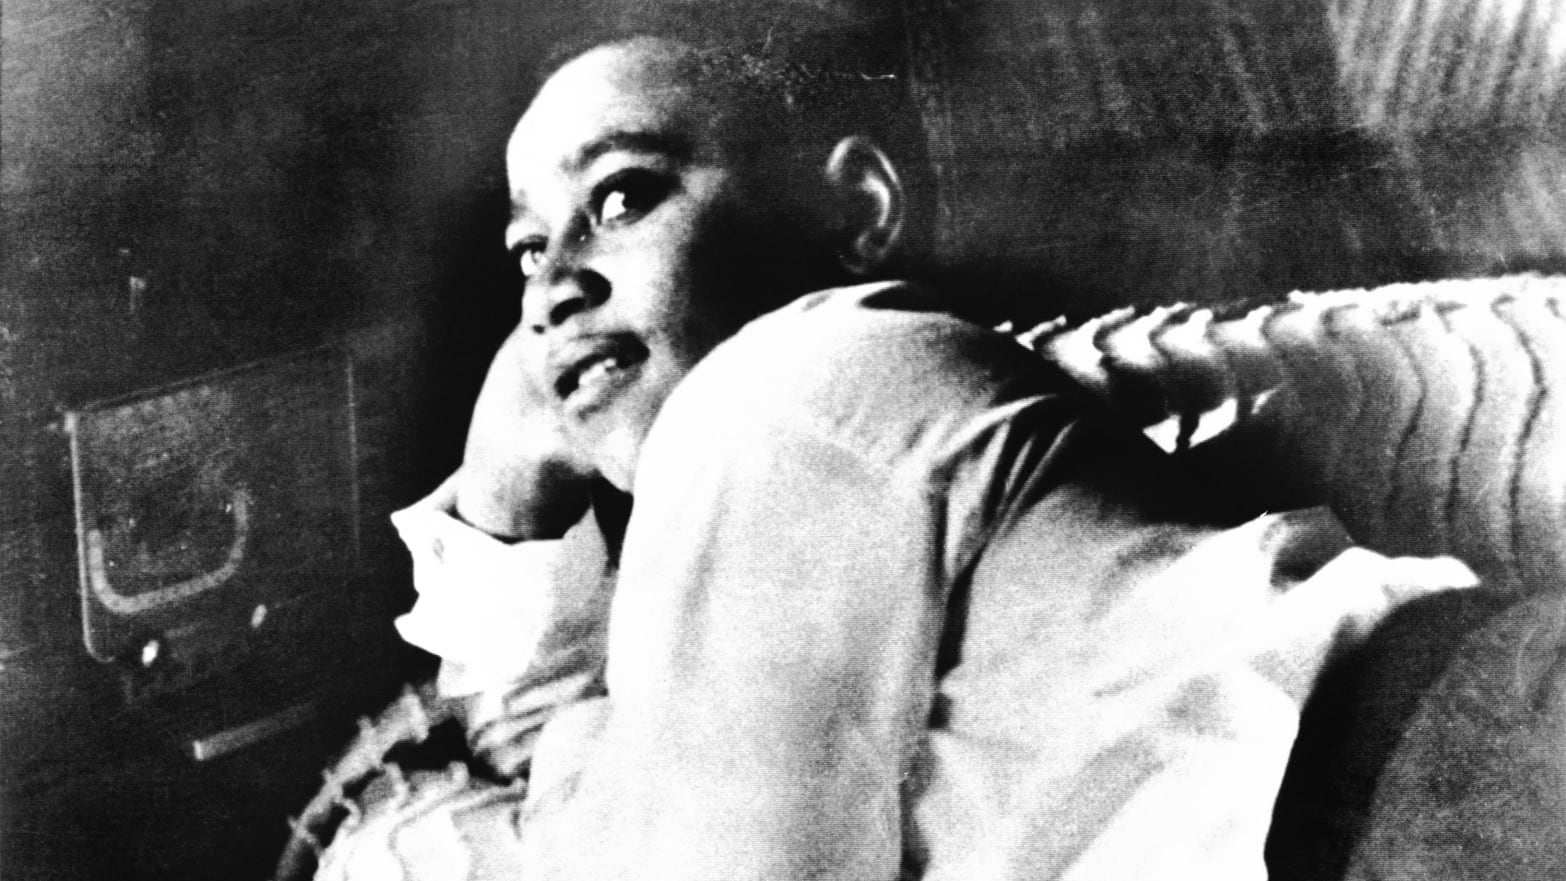 A photo including Emmett Till is shown lying on his bed.